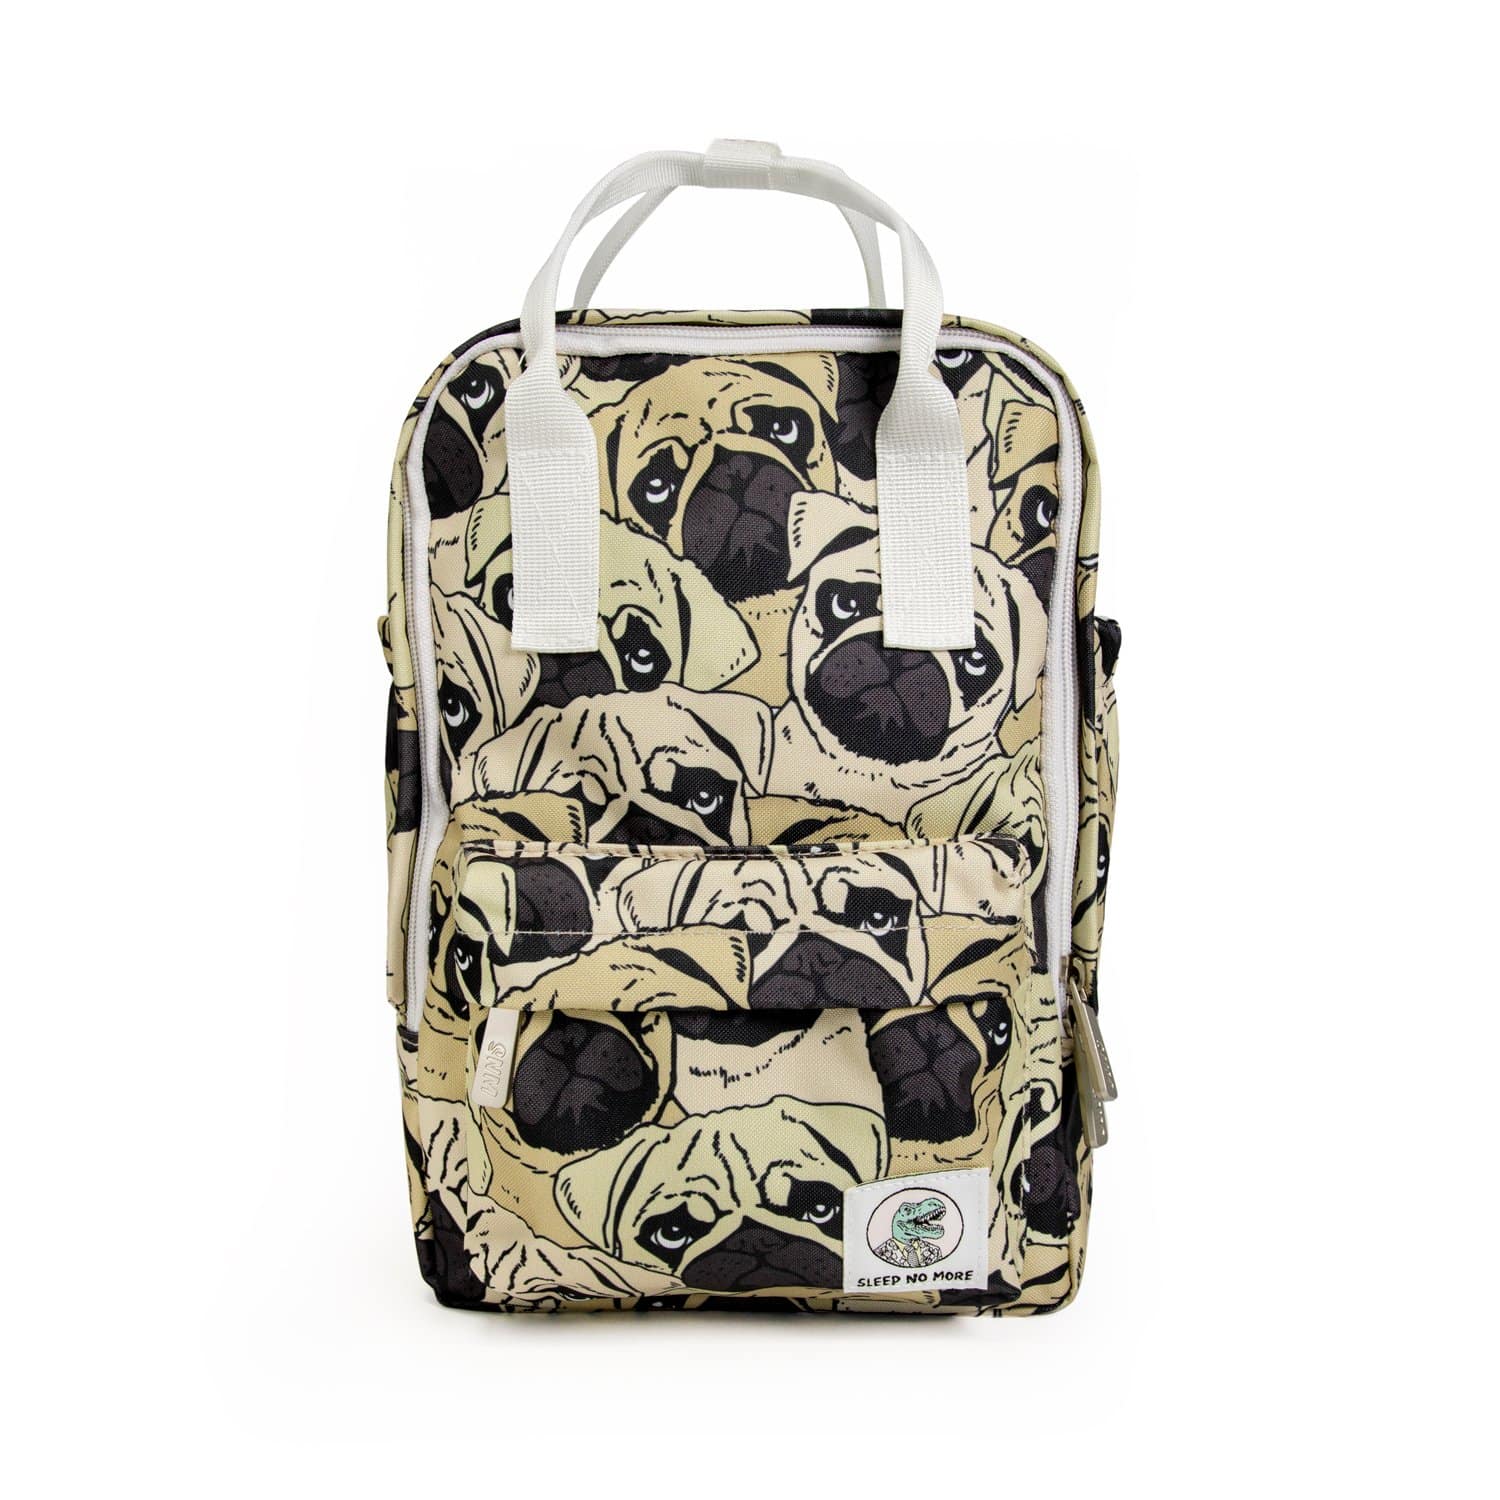 Sleep-No-More Non-toxic Kids Backpack Pugs from Gimme the Good Stuff 001